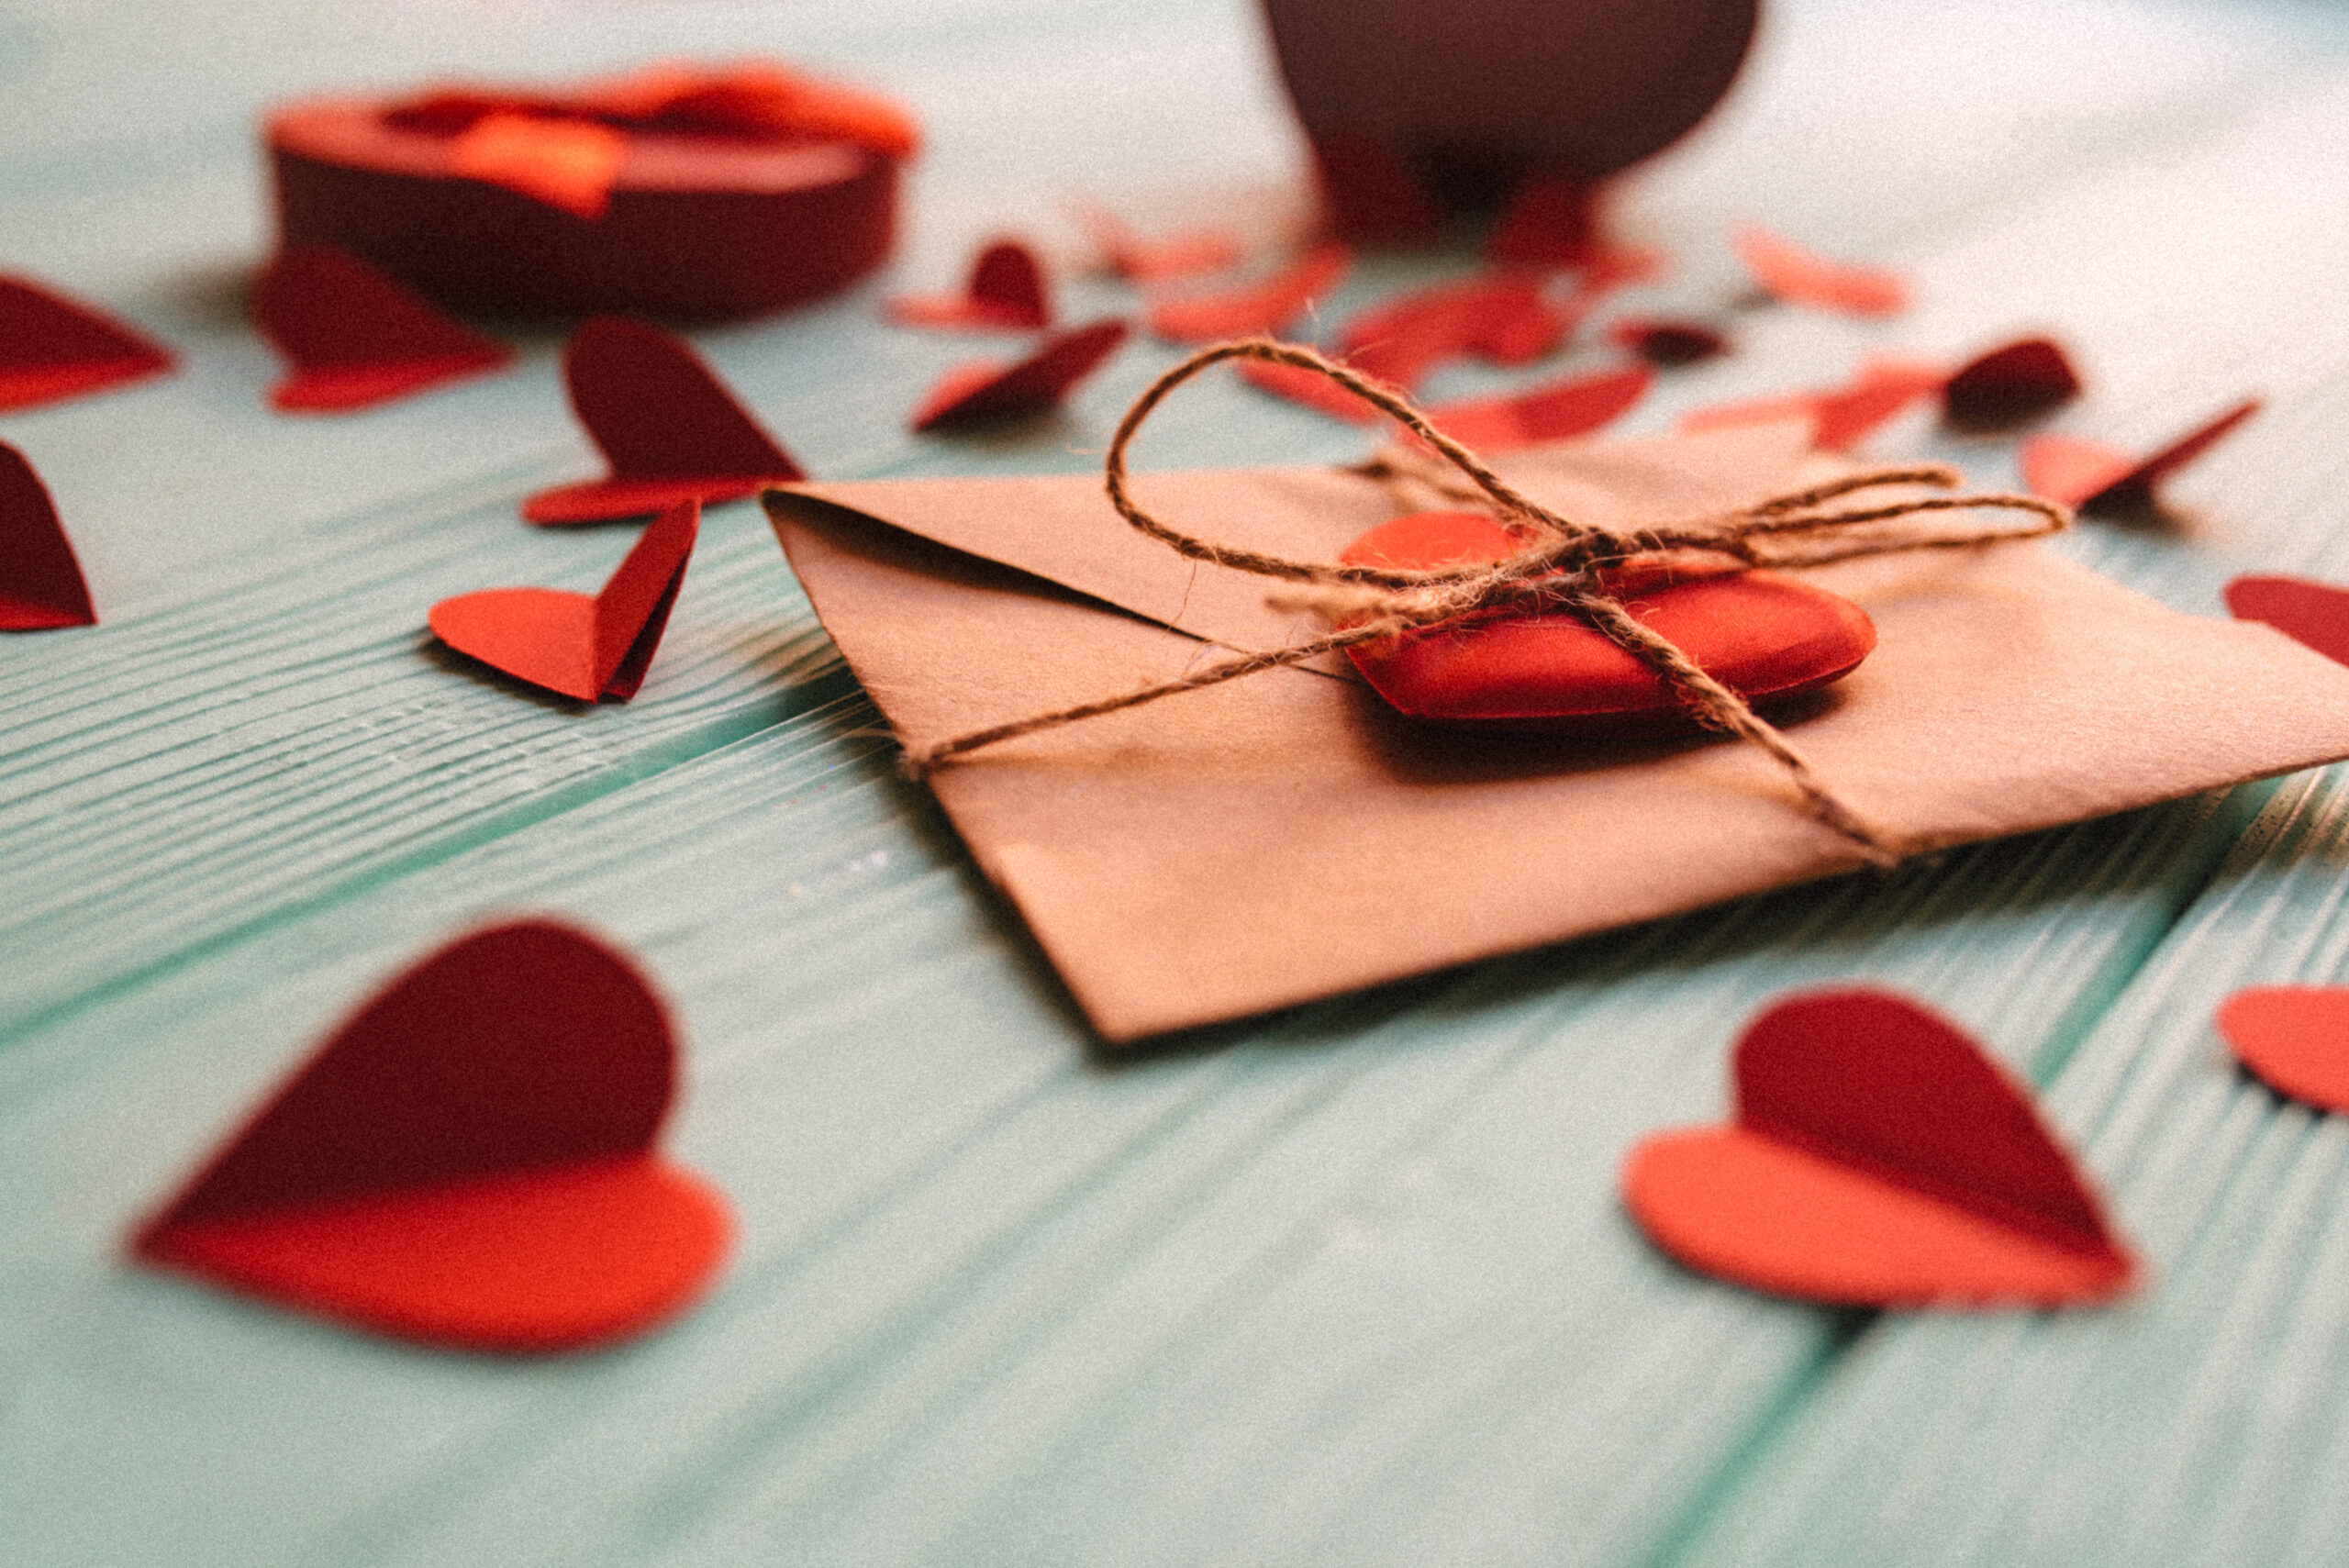 Where Does the Tradition of Valentine's Day Come From?